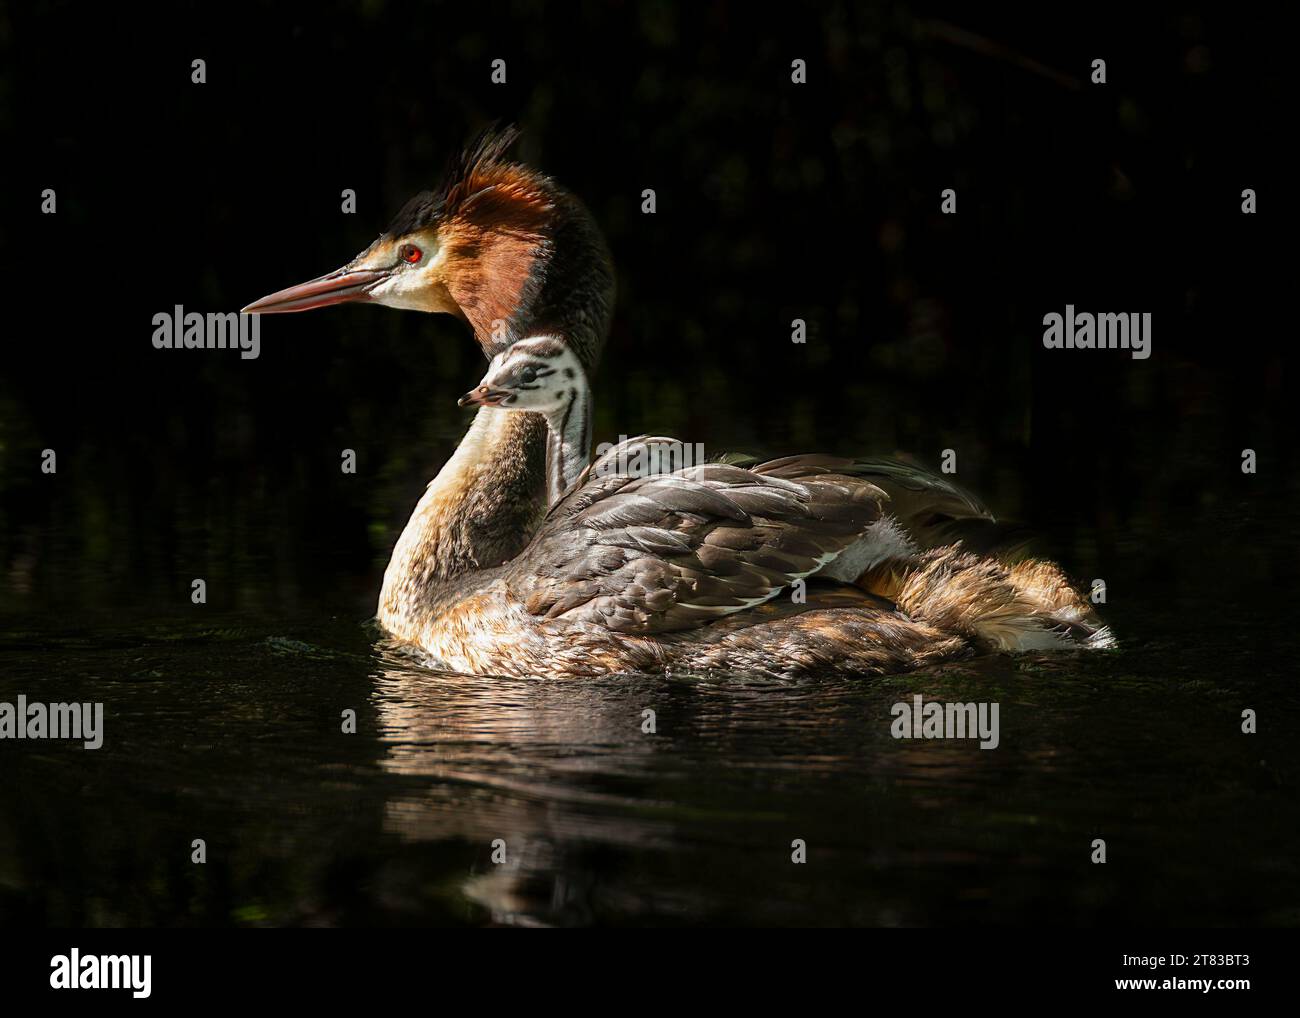 (231118) -- NEW ZEALAND, Nov. 18, 2023 (Xinhua) -- This photo taken on Nov. 4, 2023 shows puteketeke Australasian crested grebes in New Zealand. The puteketeke Australasian crested grebe has won Bird of the Century 2023, the event organizer said on Wednesday. The Bird of the Century competition is held by New Zealand's independent conservation organization Forest & Bird, in a bid to raise people's awareness of New Zealand's natural birds. The annual Bird of the Year contest has been temporarily rebranded as 'Bird of the Century' this year to celebrate the 100th birthday of Forest & Bird. (Pho Stock Photo